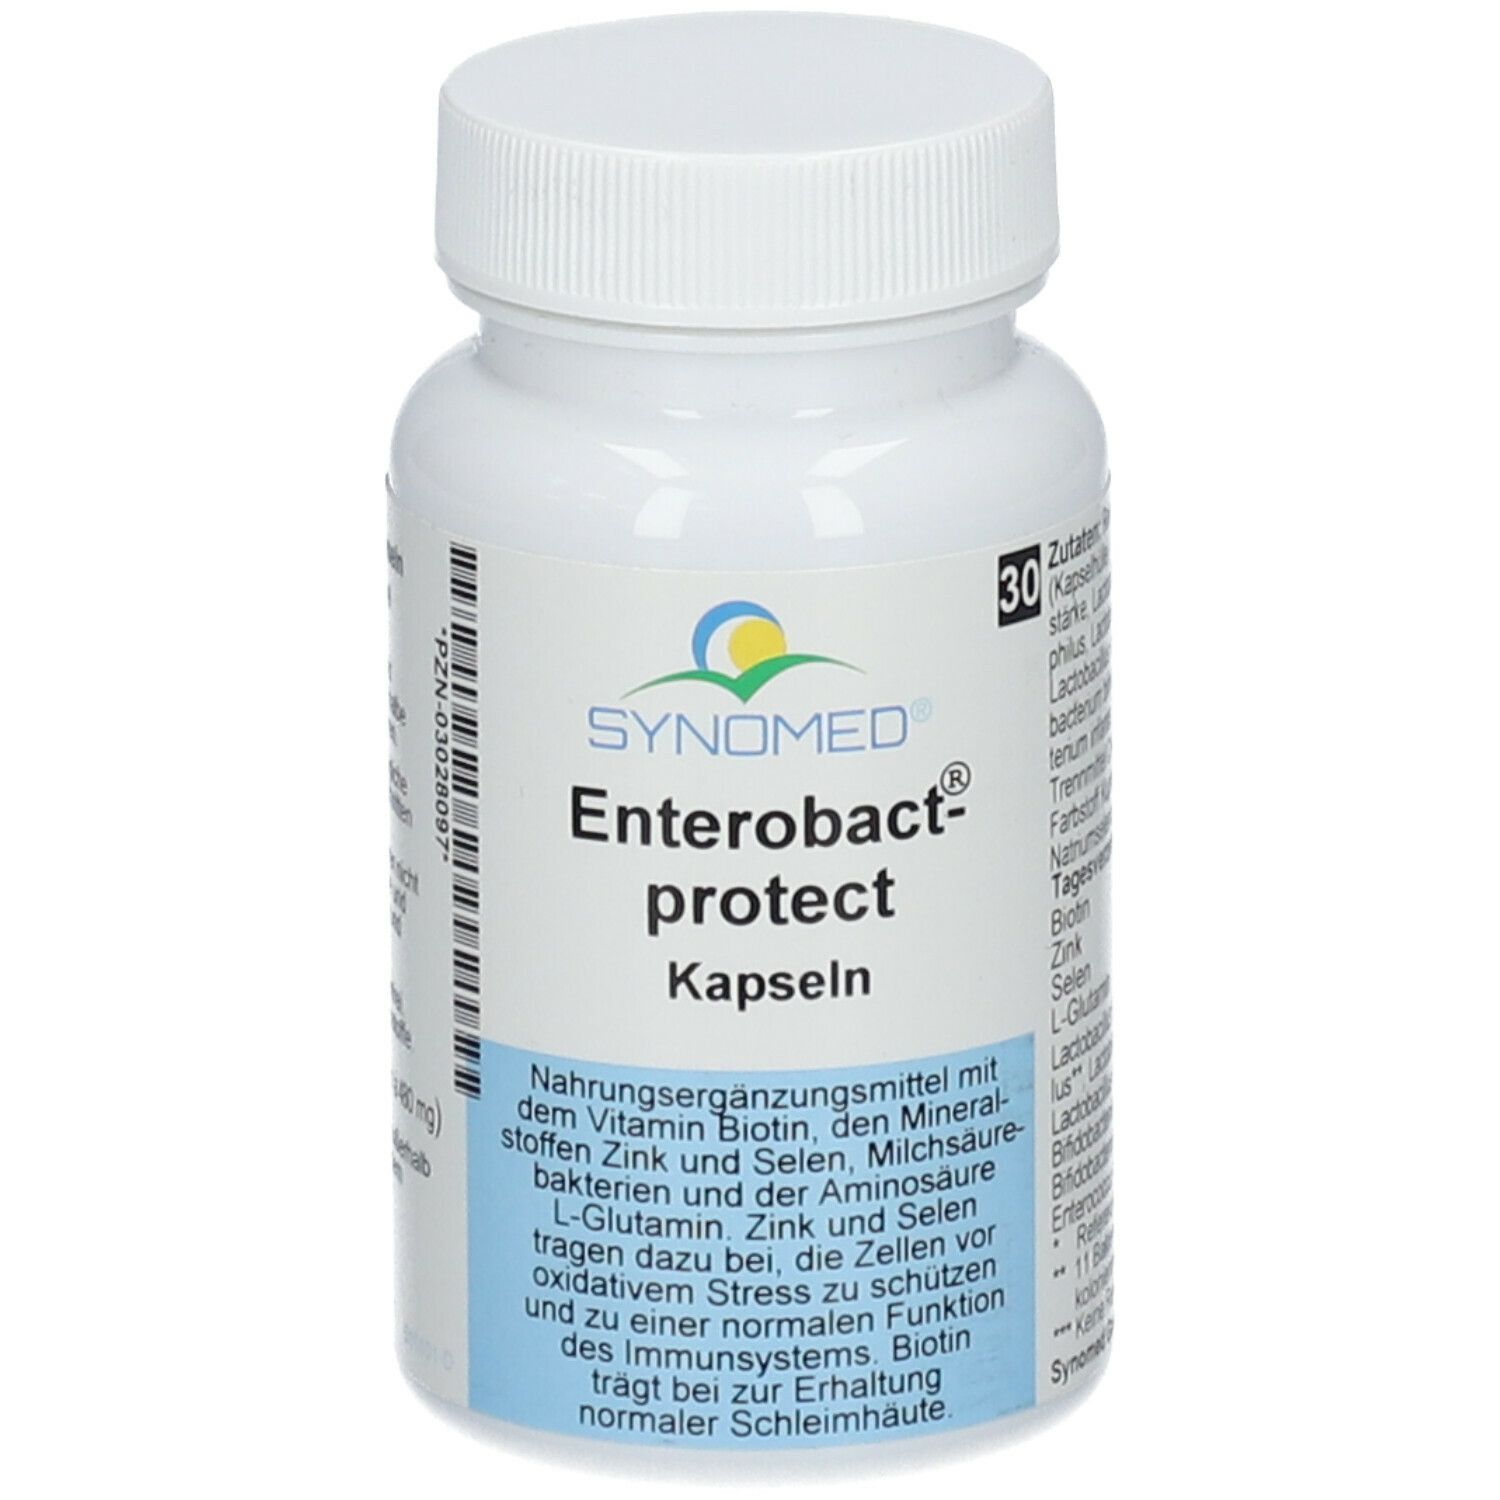 SYNOMED Enterobact®-protect